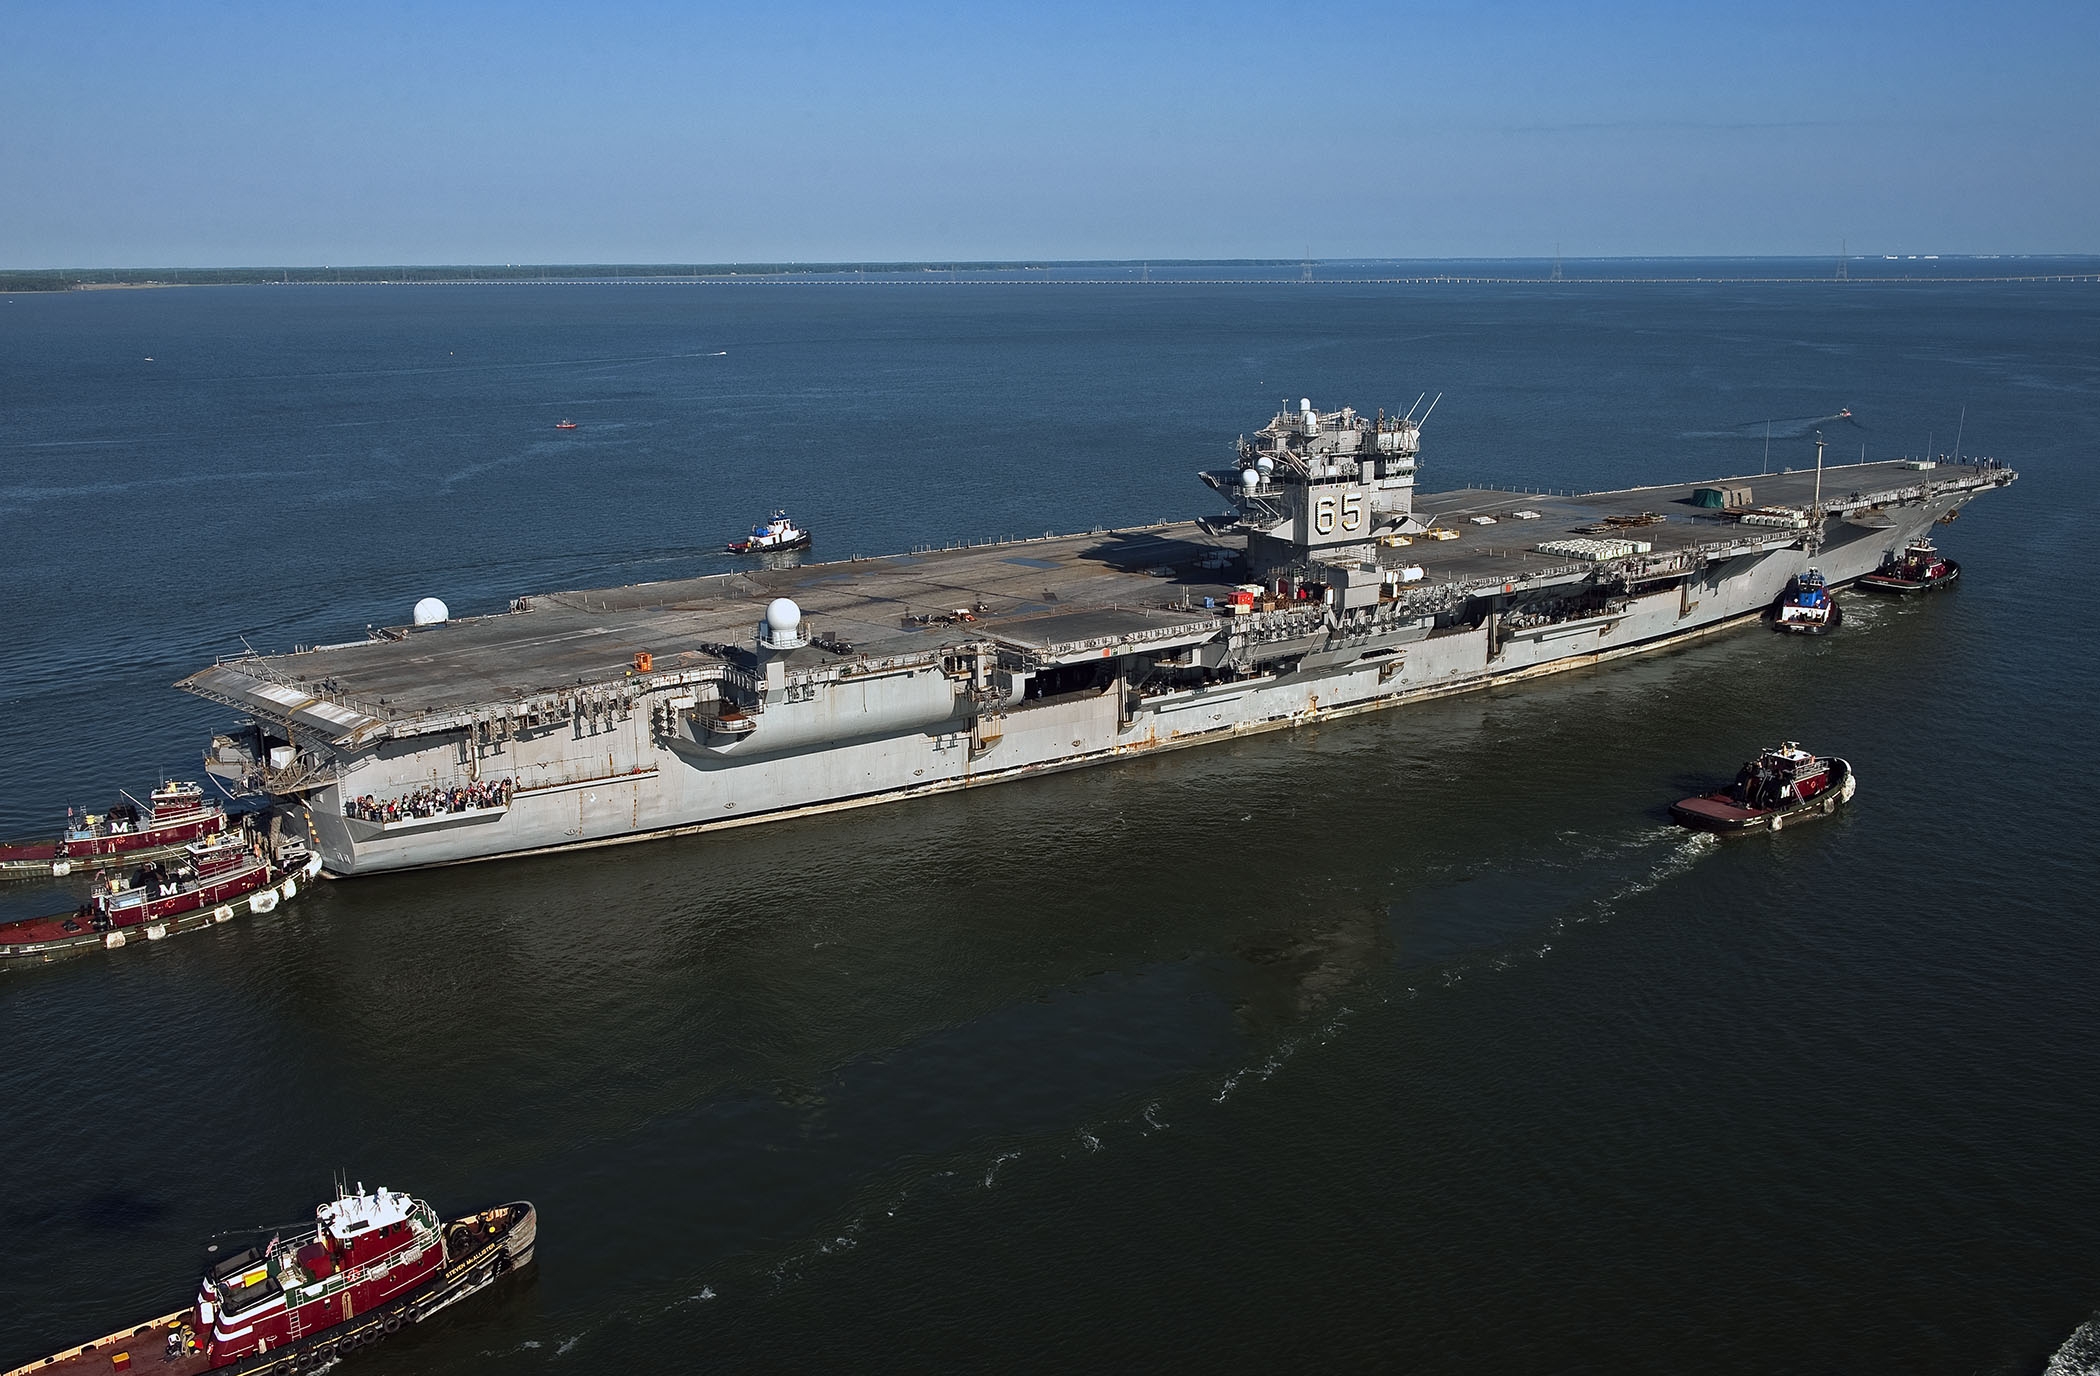 NORFOLK (June 20, 2013) The aircraft carrier USS Enterprise (CVN 65) makes its final voyage to Newport News Shipbuilding. The first nuclear-powered aircraft carrier will be dismantled at the shipyard prior to the scheduled commissioning of the next aircraft carrier Enterprise (CVN 80). (U.S. Navy photo courtesy of Huntington Ingalls Industries by John Whalen/Released) 130620-N-ZZ999-101 Join the conversation http://www.facebook.com/USNavy http://www.twitter.com/USNavy http://navylive.dodlive.mil http://pinterest.com https://plus.google.com